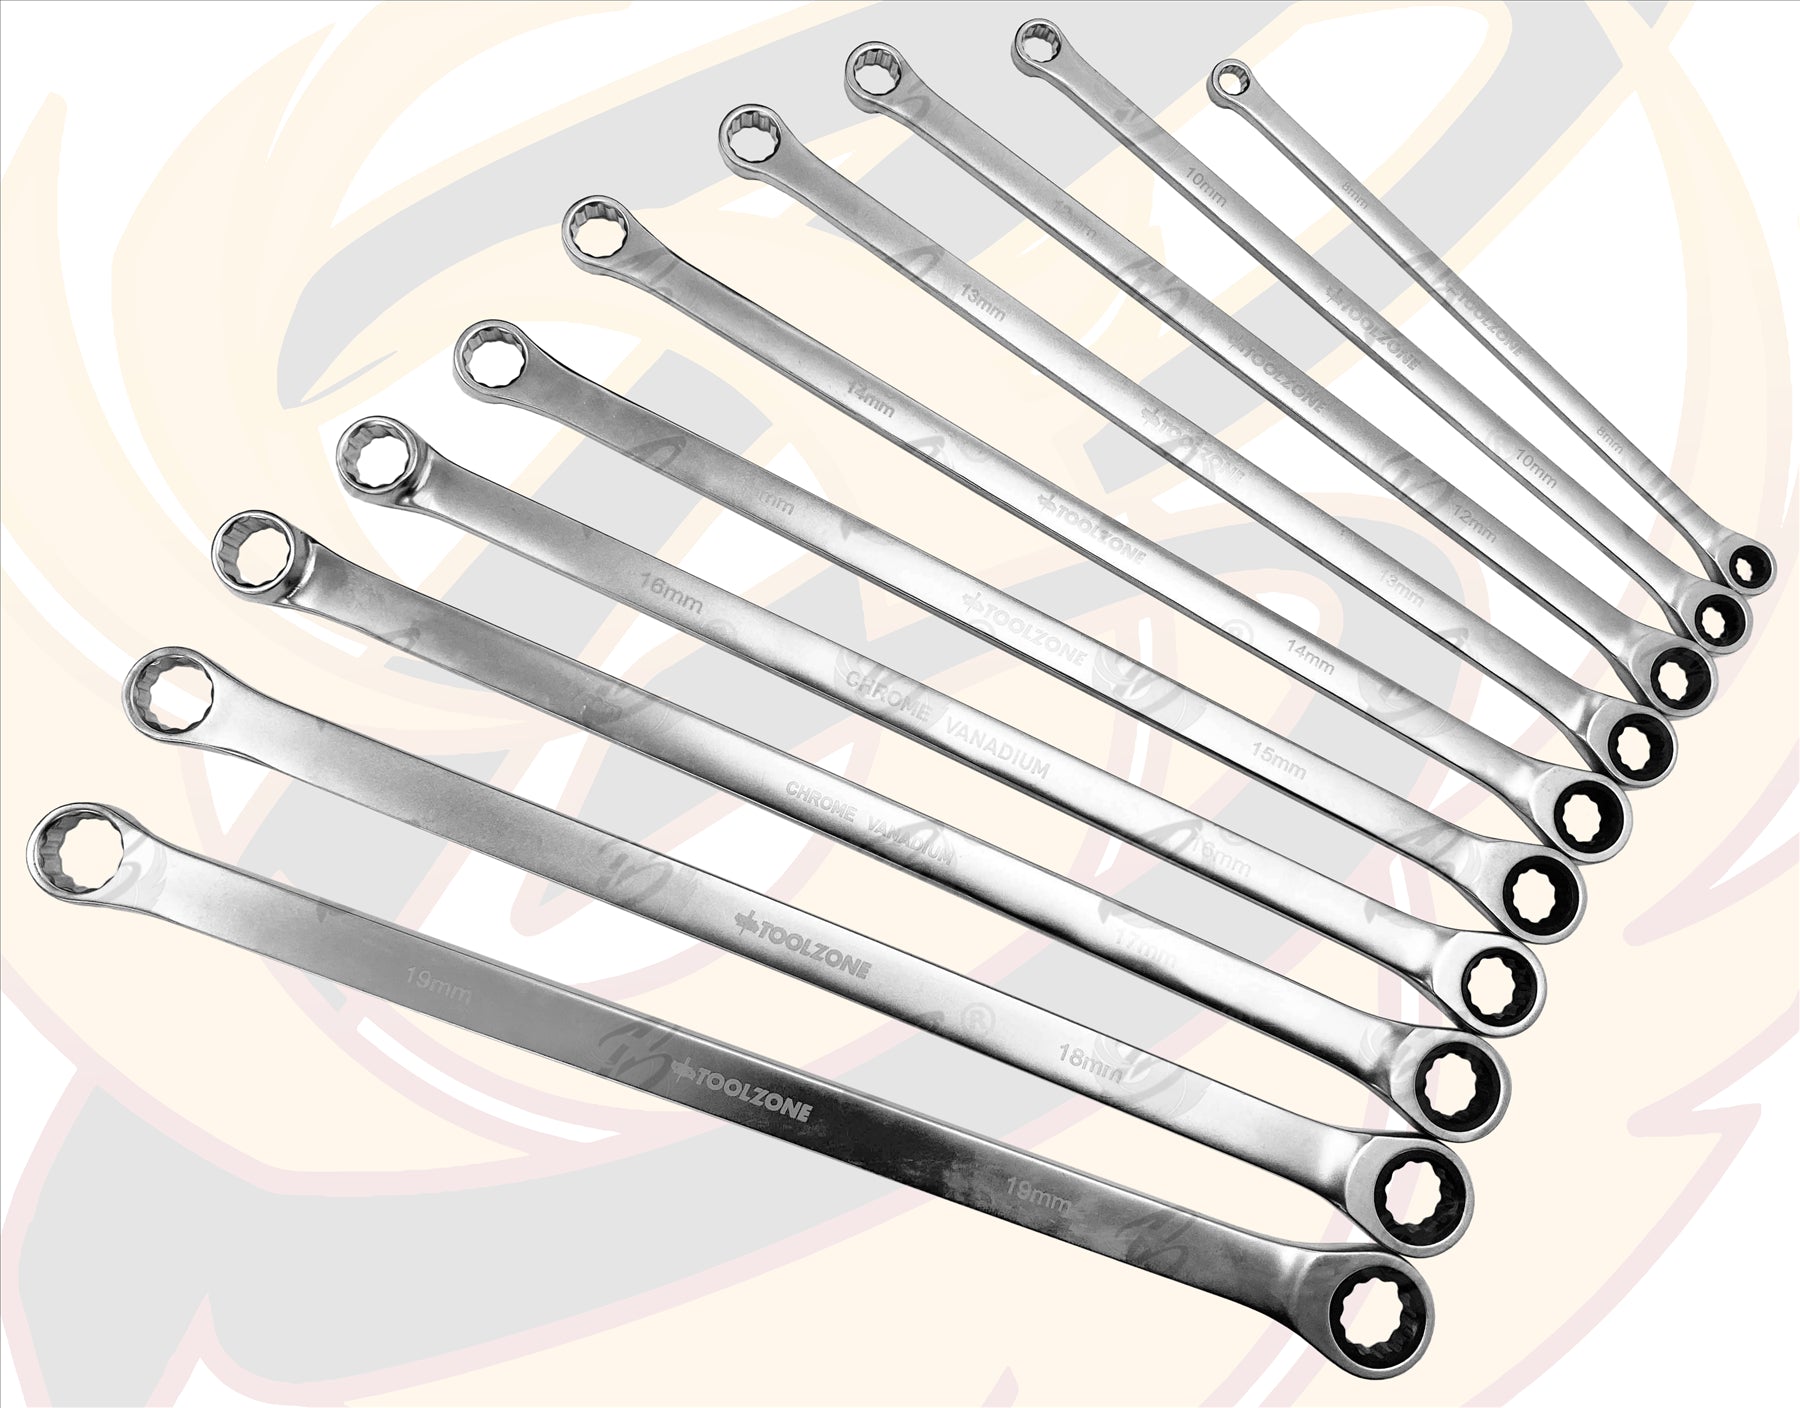 TOOLZONE 10PCS SINGLE RING EXTRA LONG RATCHET AVIATION SPANNERS 8MM - 10MM